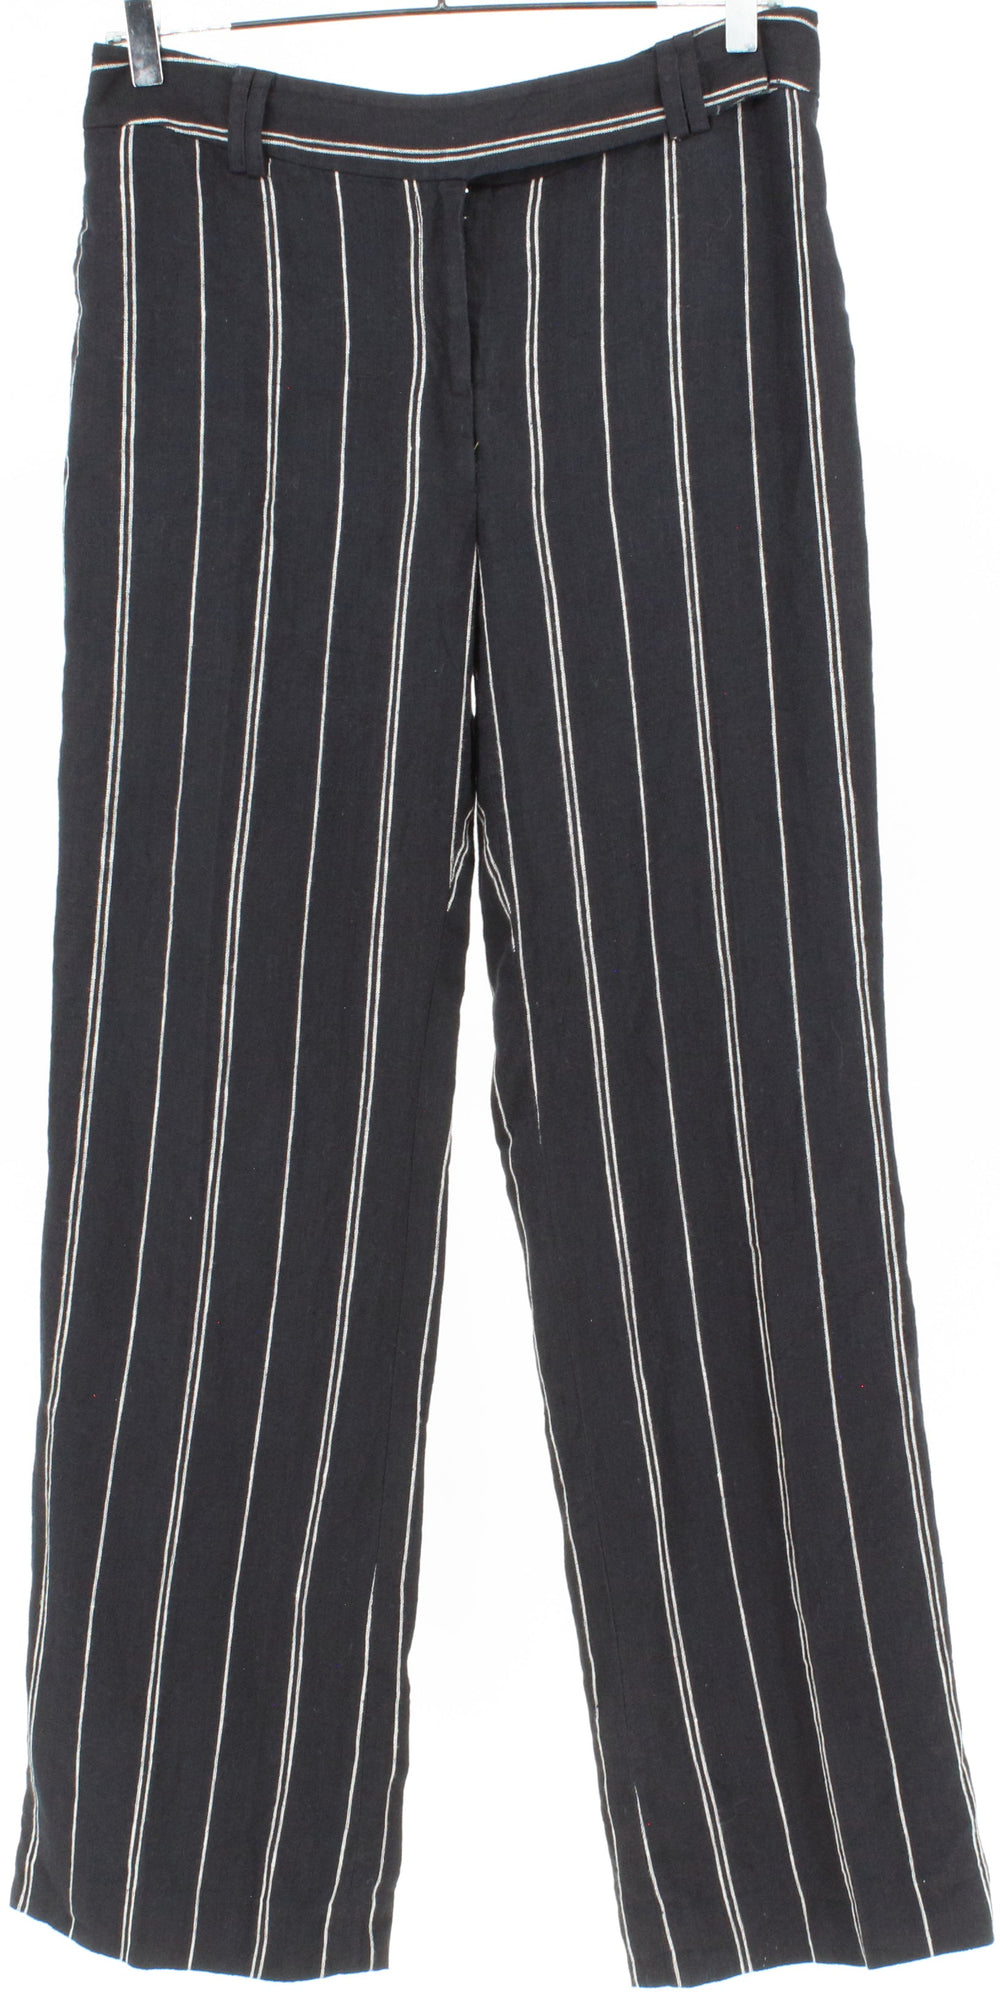 Style & Co. Black and White Striped Linen Straight Pants